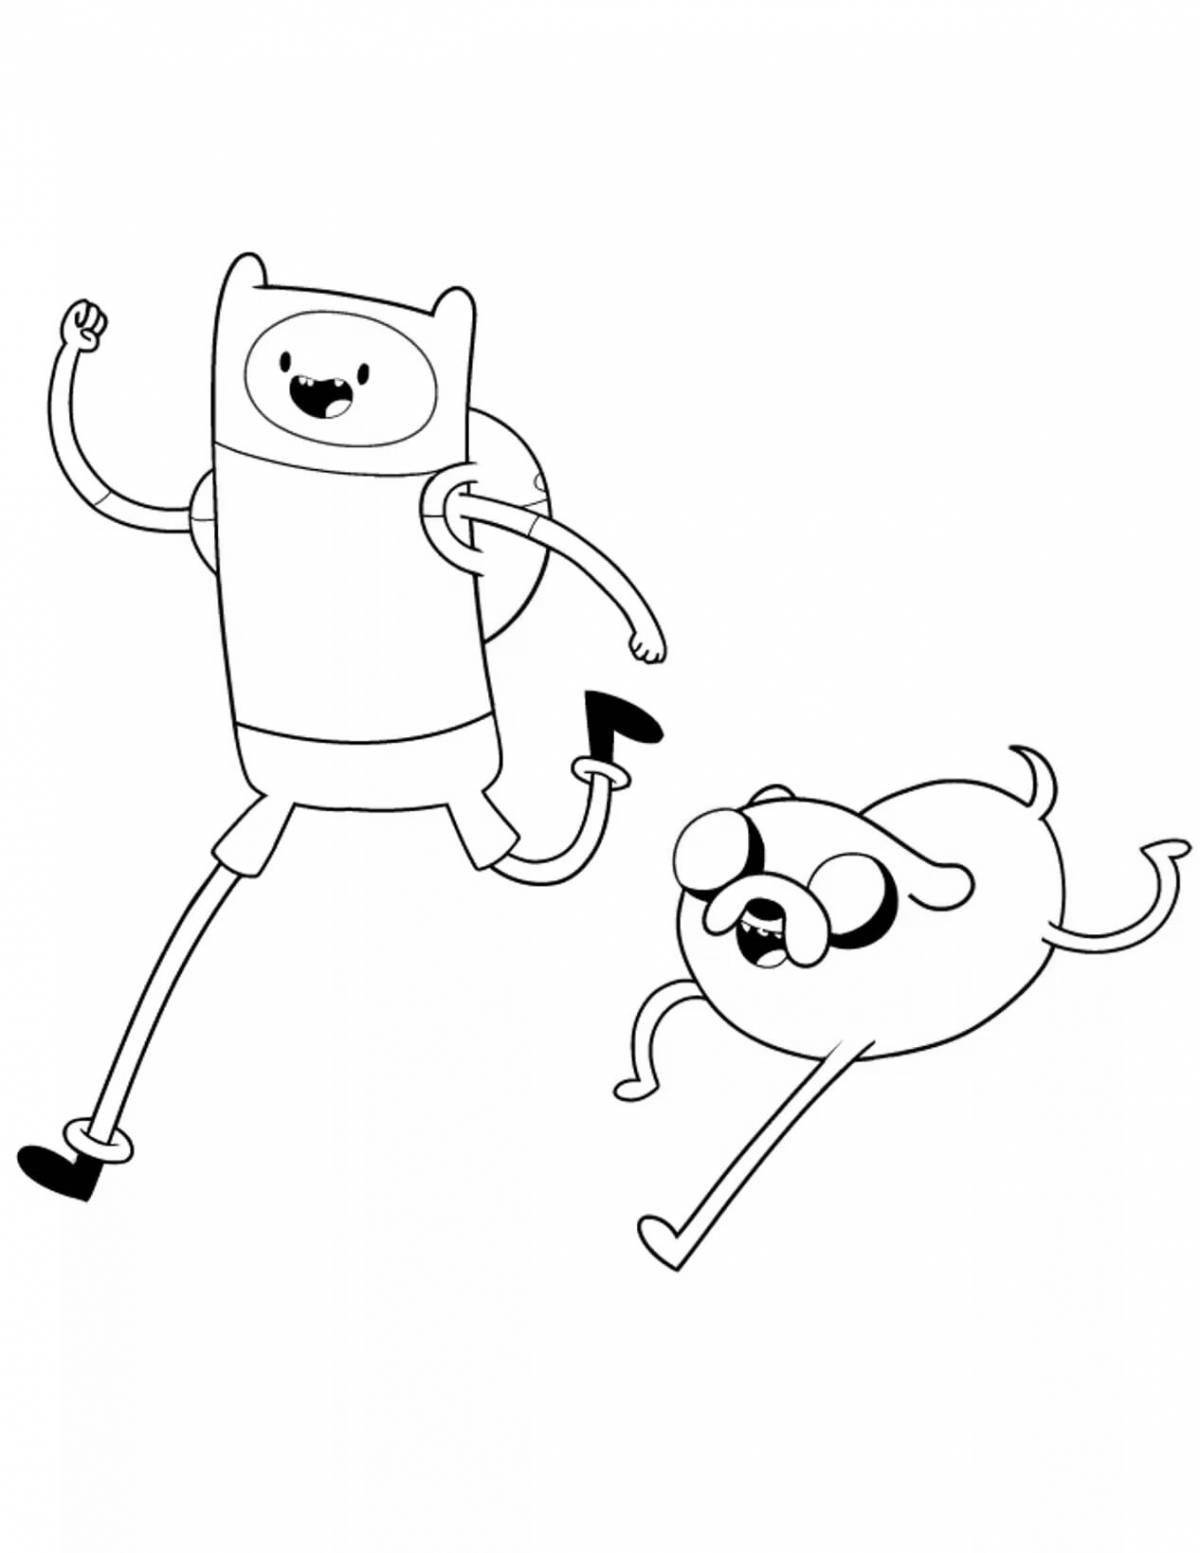 Exotic adventure time fin and jake